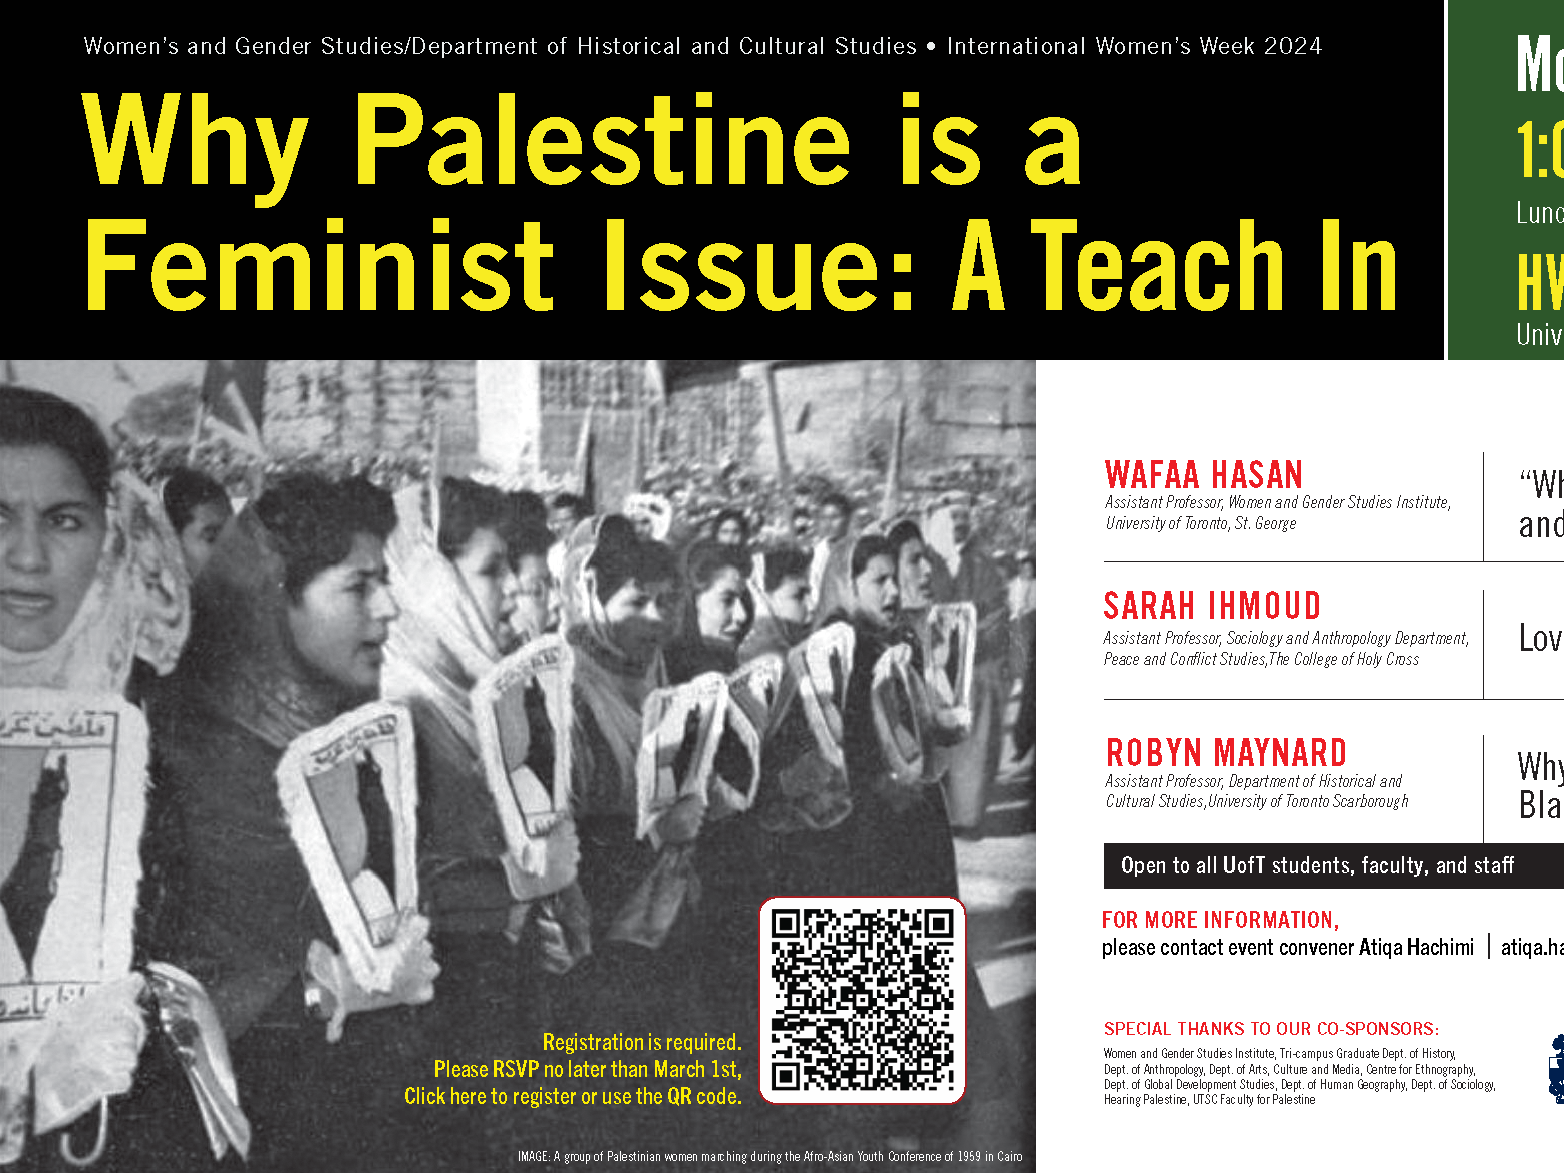 Poster for Why Palestine is a Feminist Issue Teach In Event featuring a list of the event speakers, date, time and location